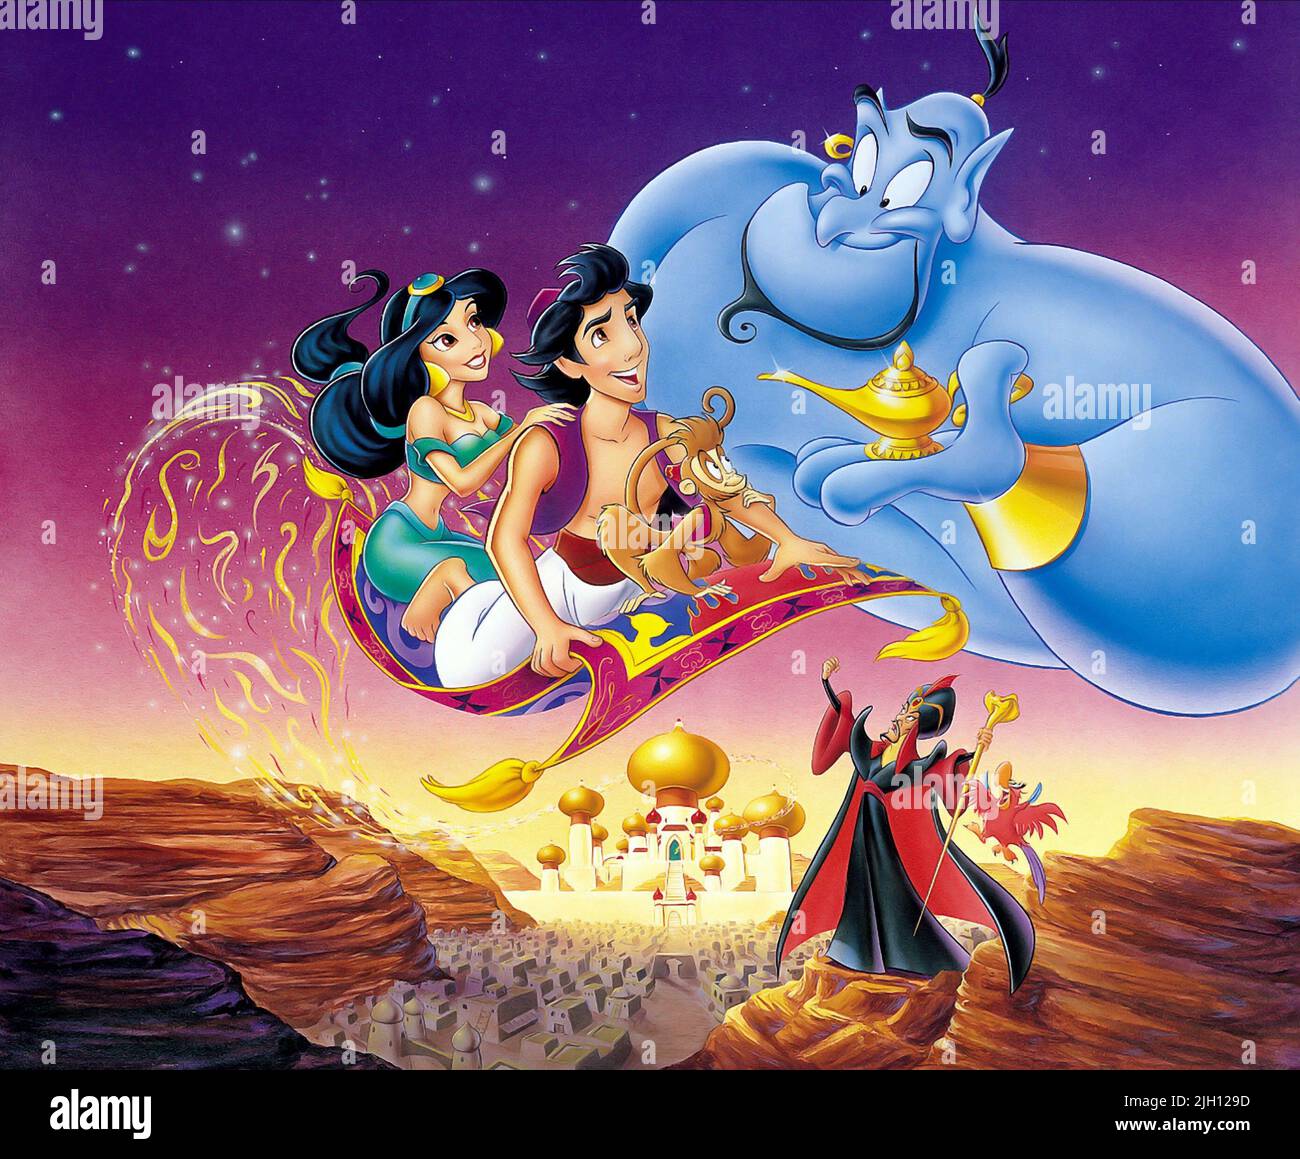 Genie alladin still hi-res stock photography and images - Alamy